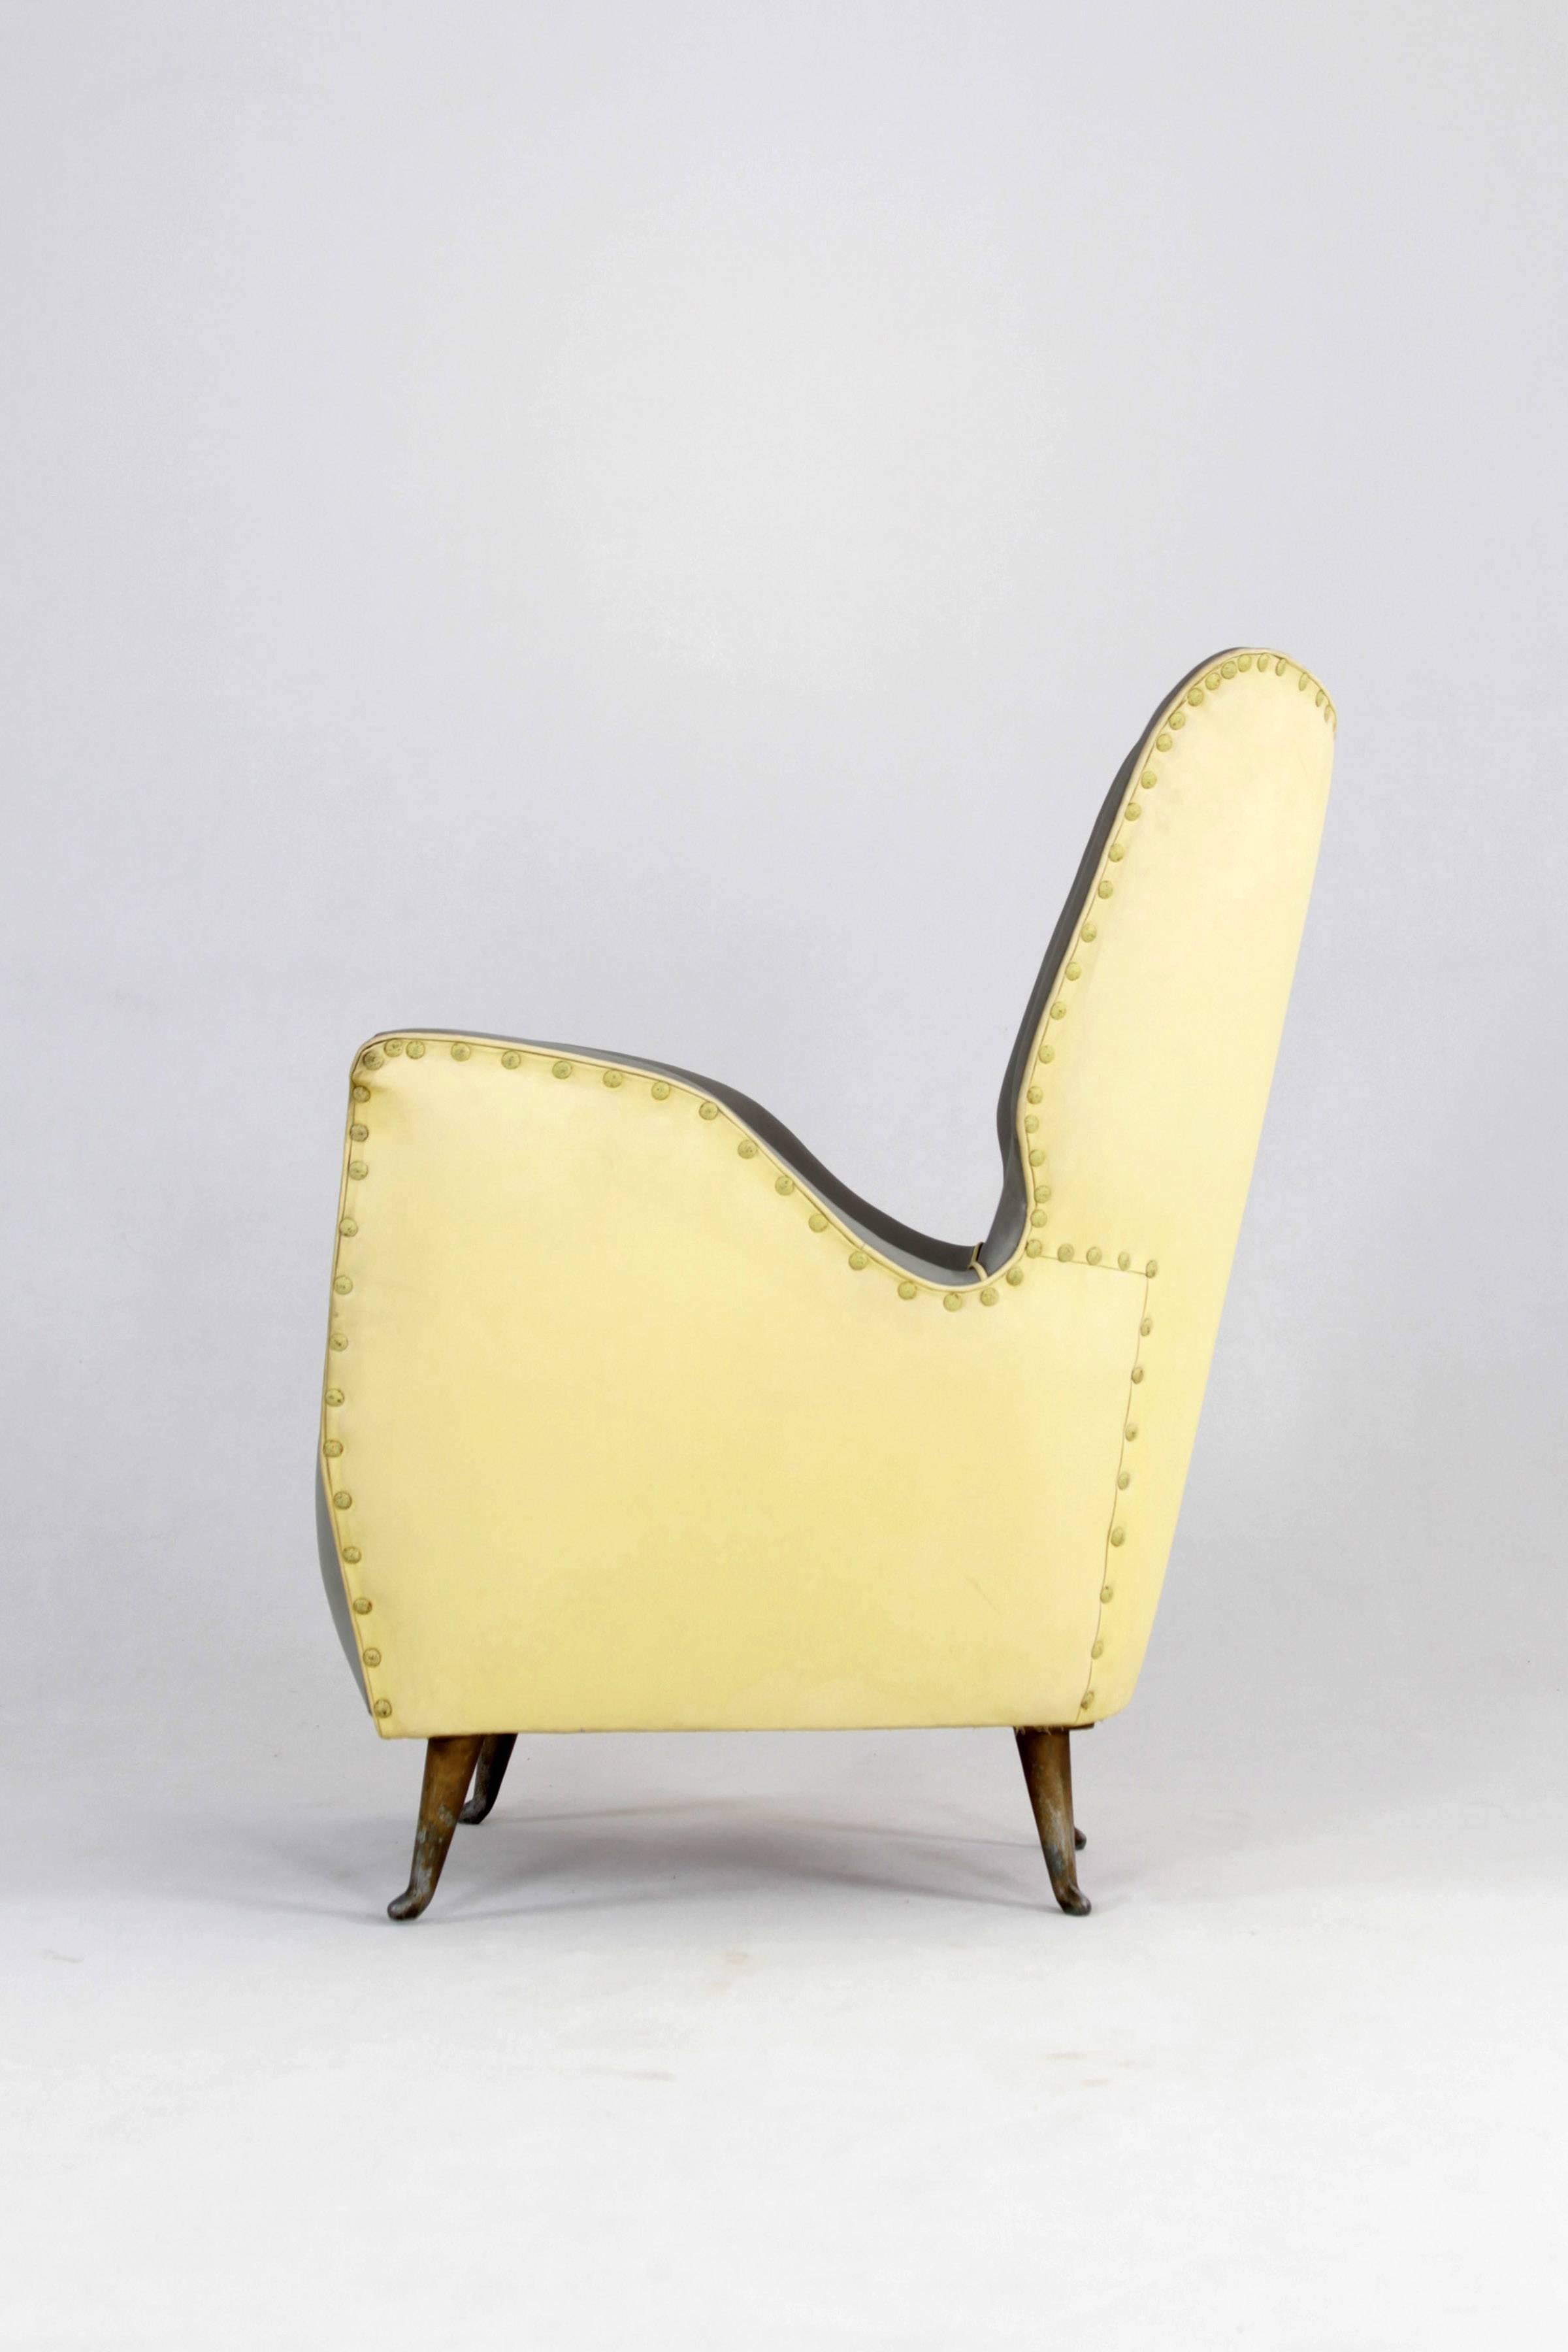 This Italian armchair was manufactured by I.S.A. Bergamo in the 1950s. The furniture body has the original skai cover in yellow and light grey and is supported by patinated brass legs. The armchair is in good vintage condition.

Do not hesitate to